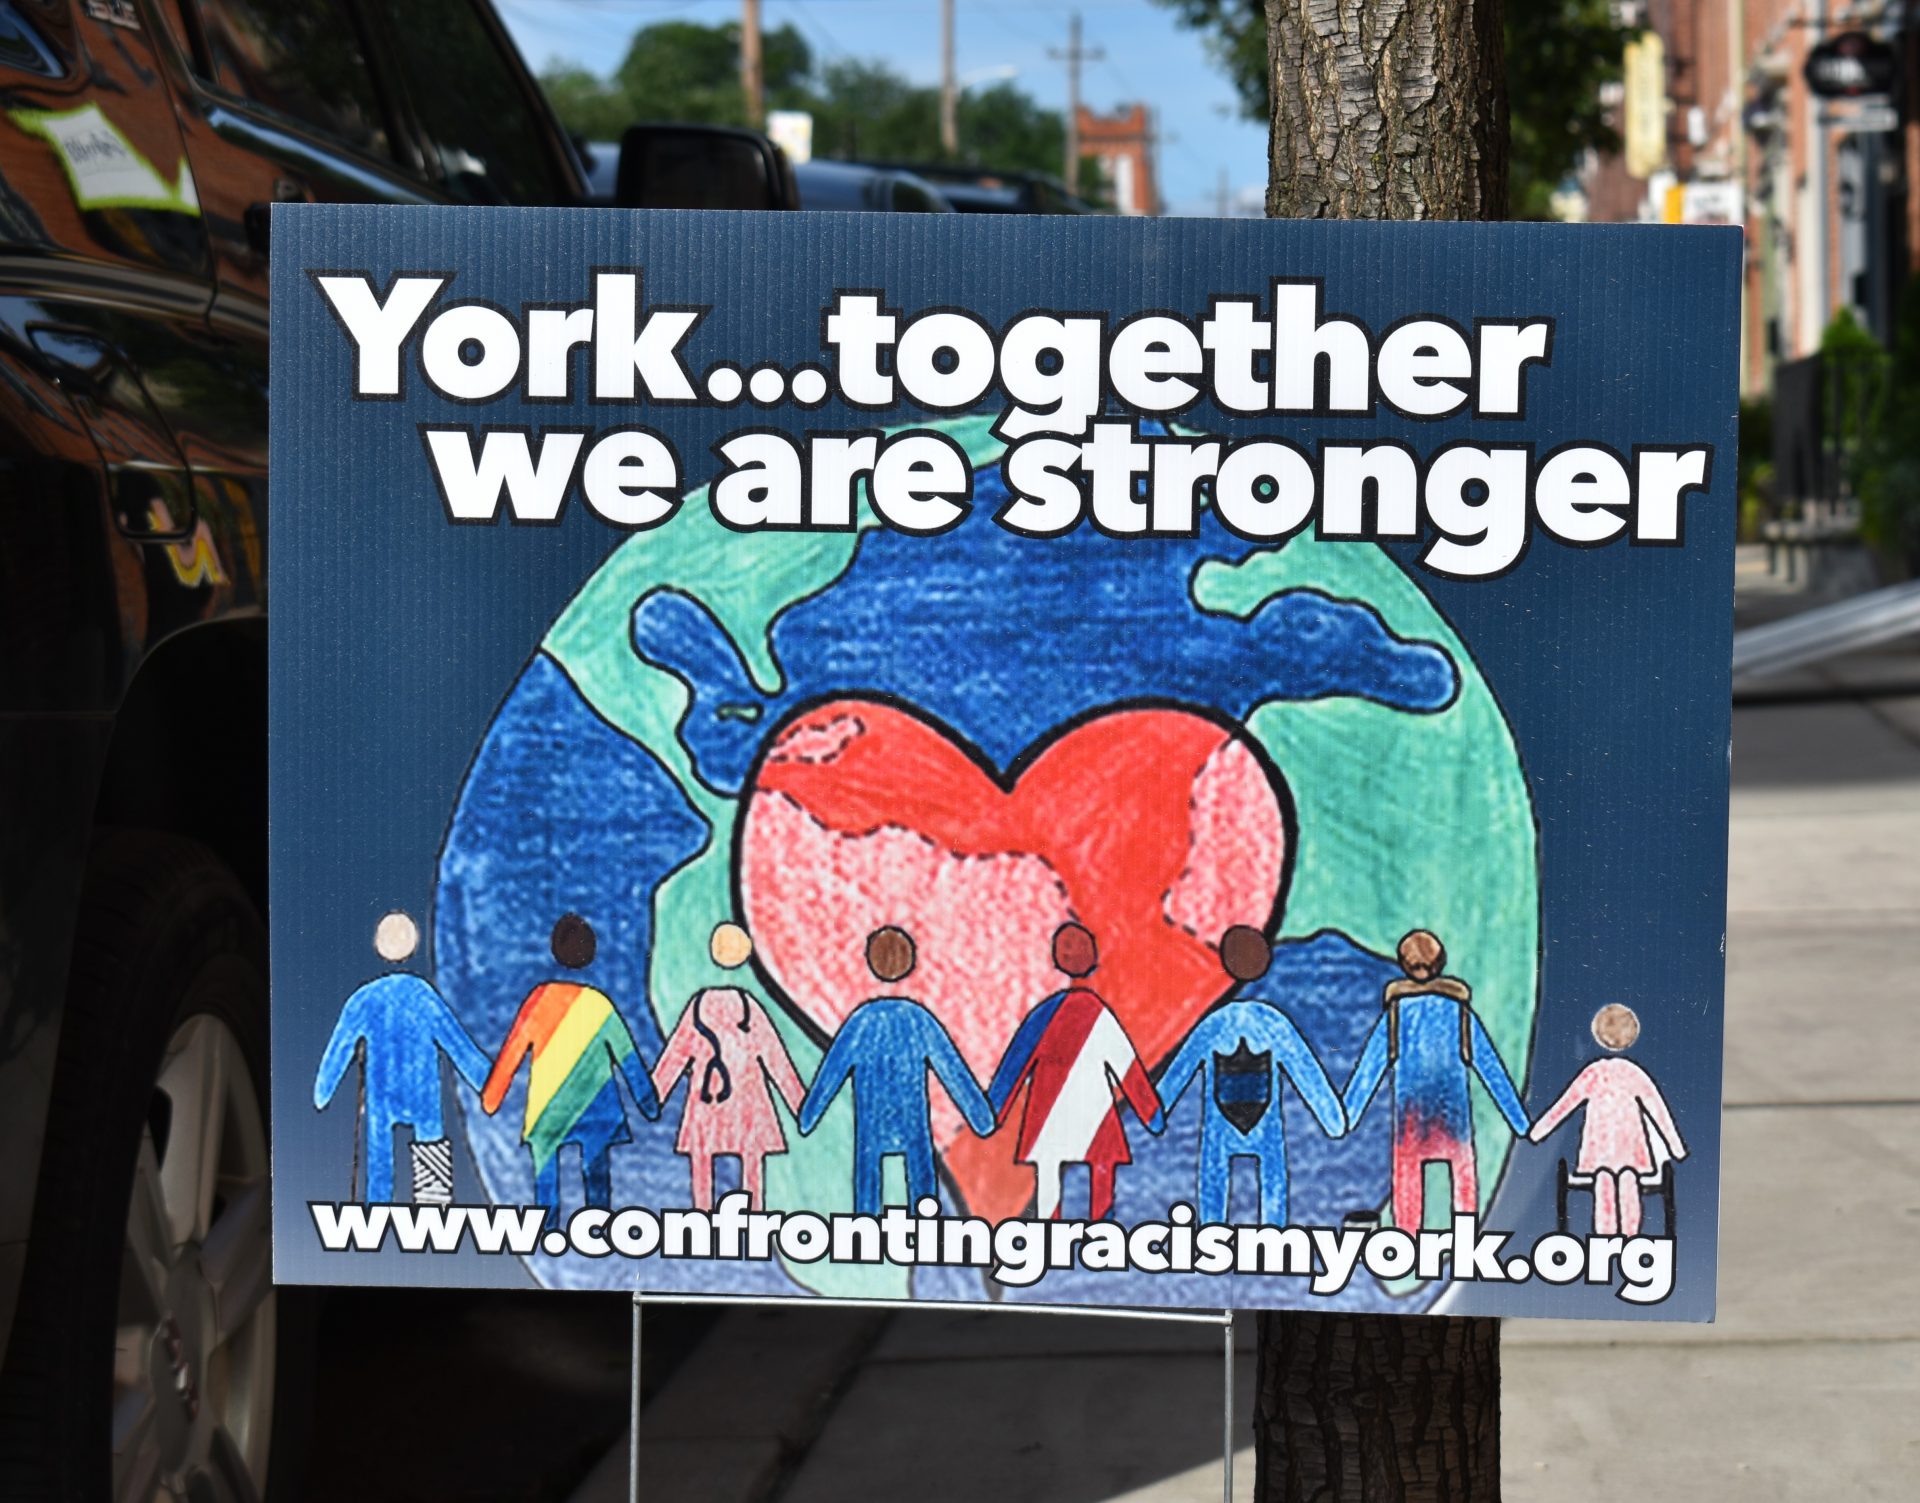 A sign for the Confronting Racism Coalition is seen in York on June 12, 2019.